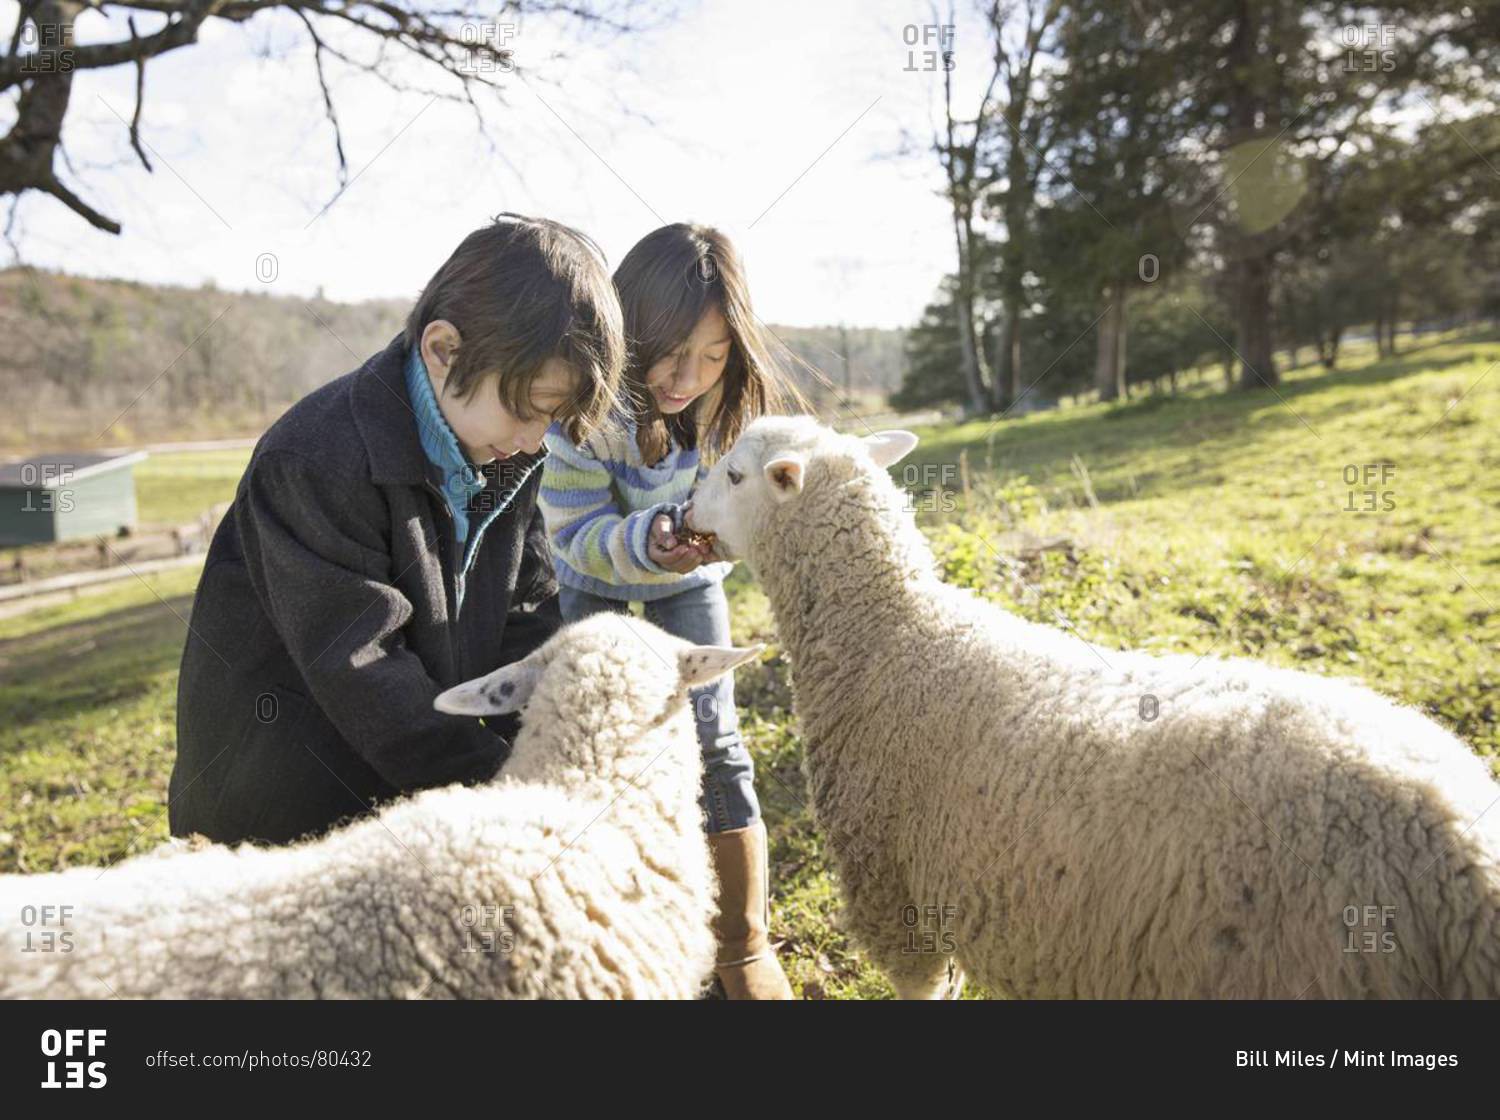 Two children at an animal sanctuary, in a paddock feeding two sheep.